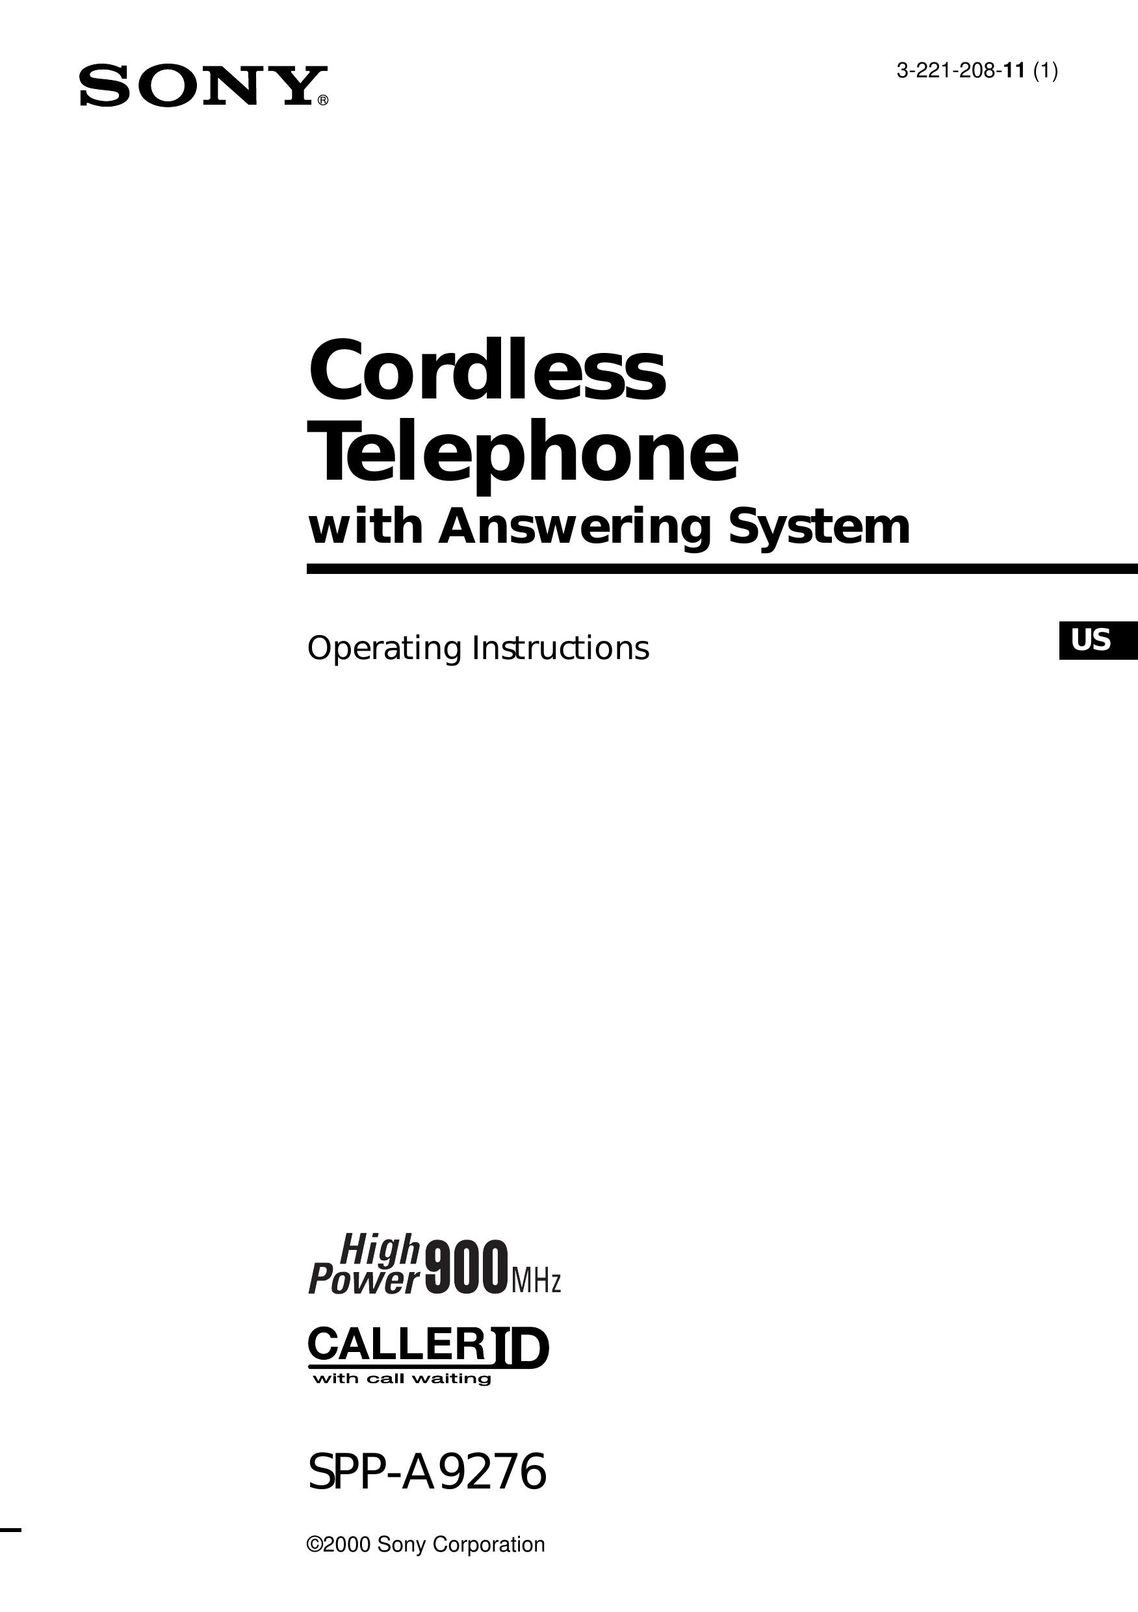 Sony SPP-A9276 Cordless Telephone User Manual